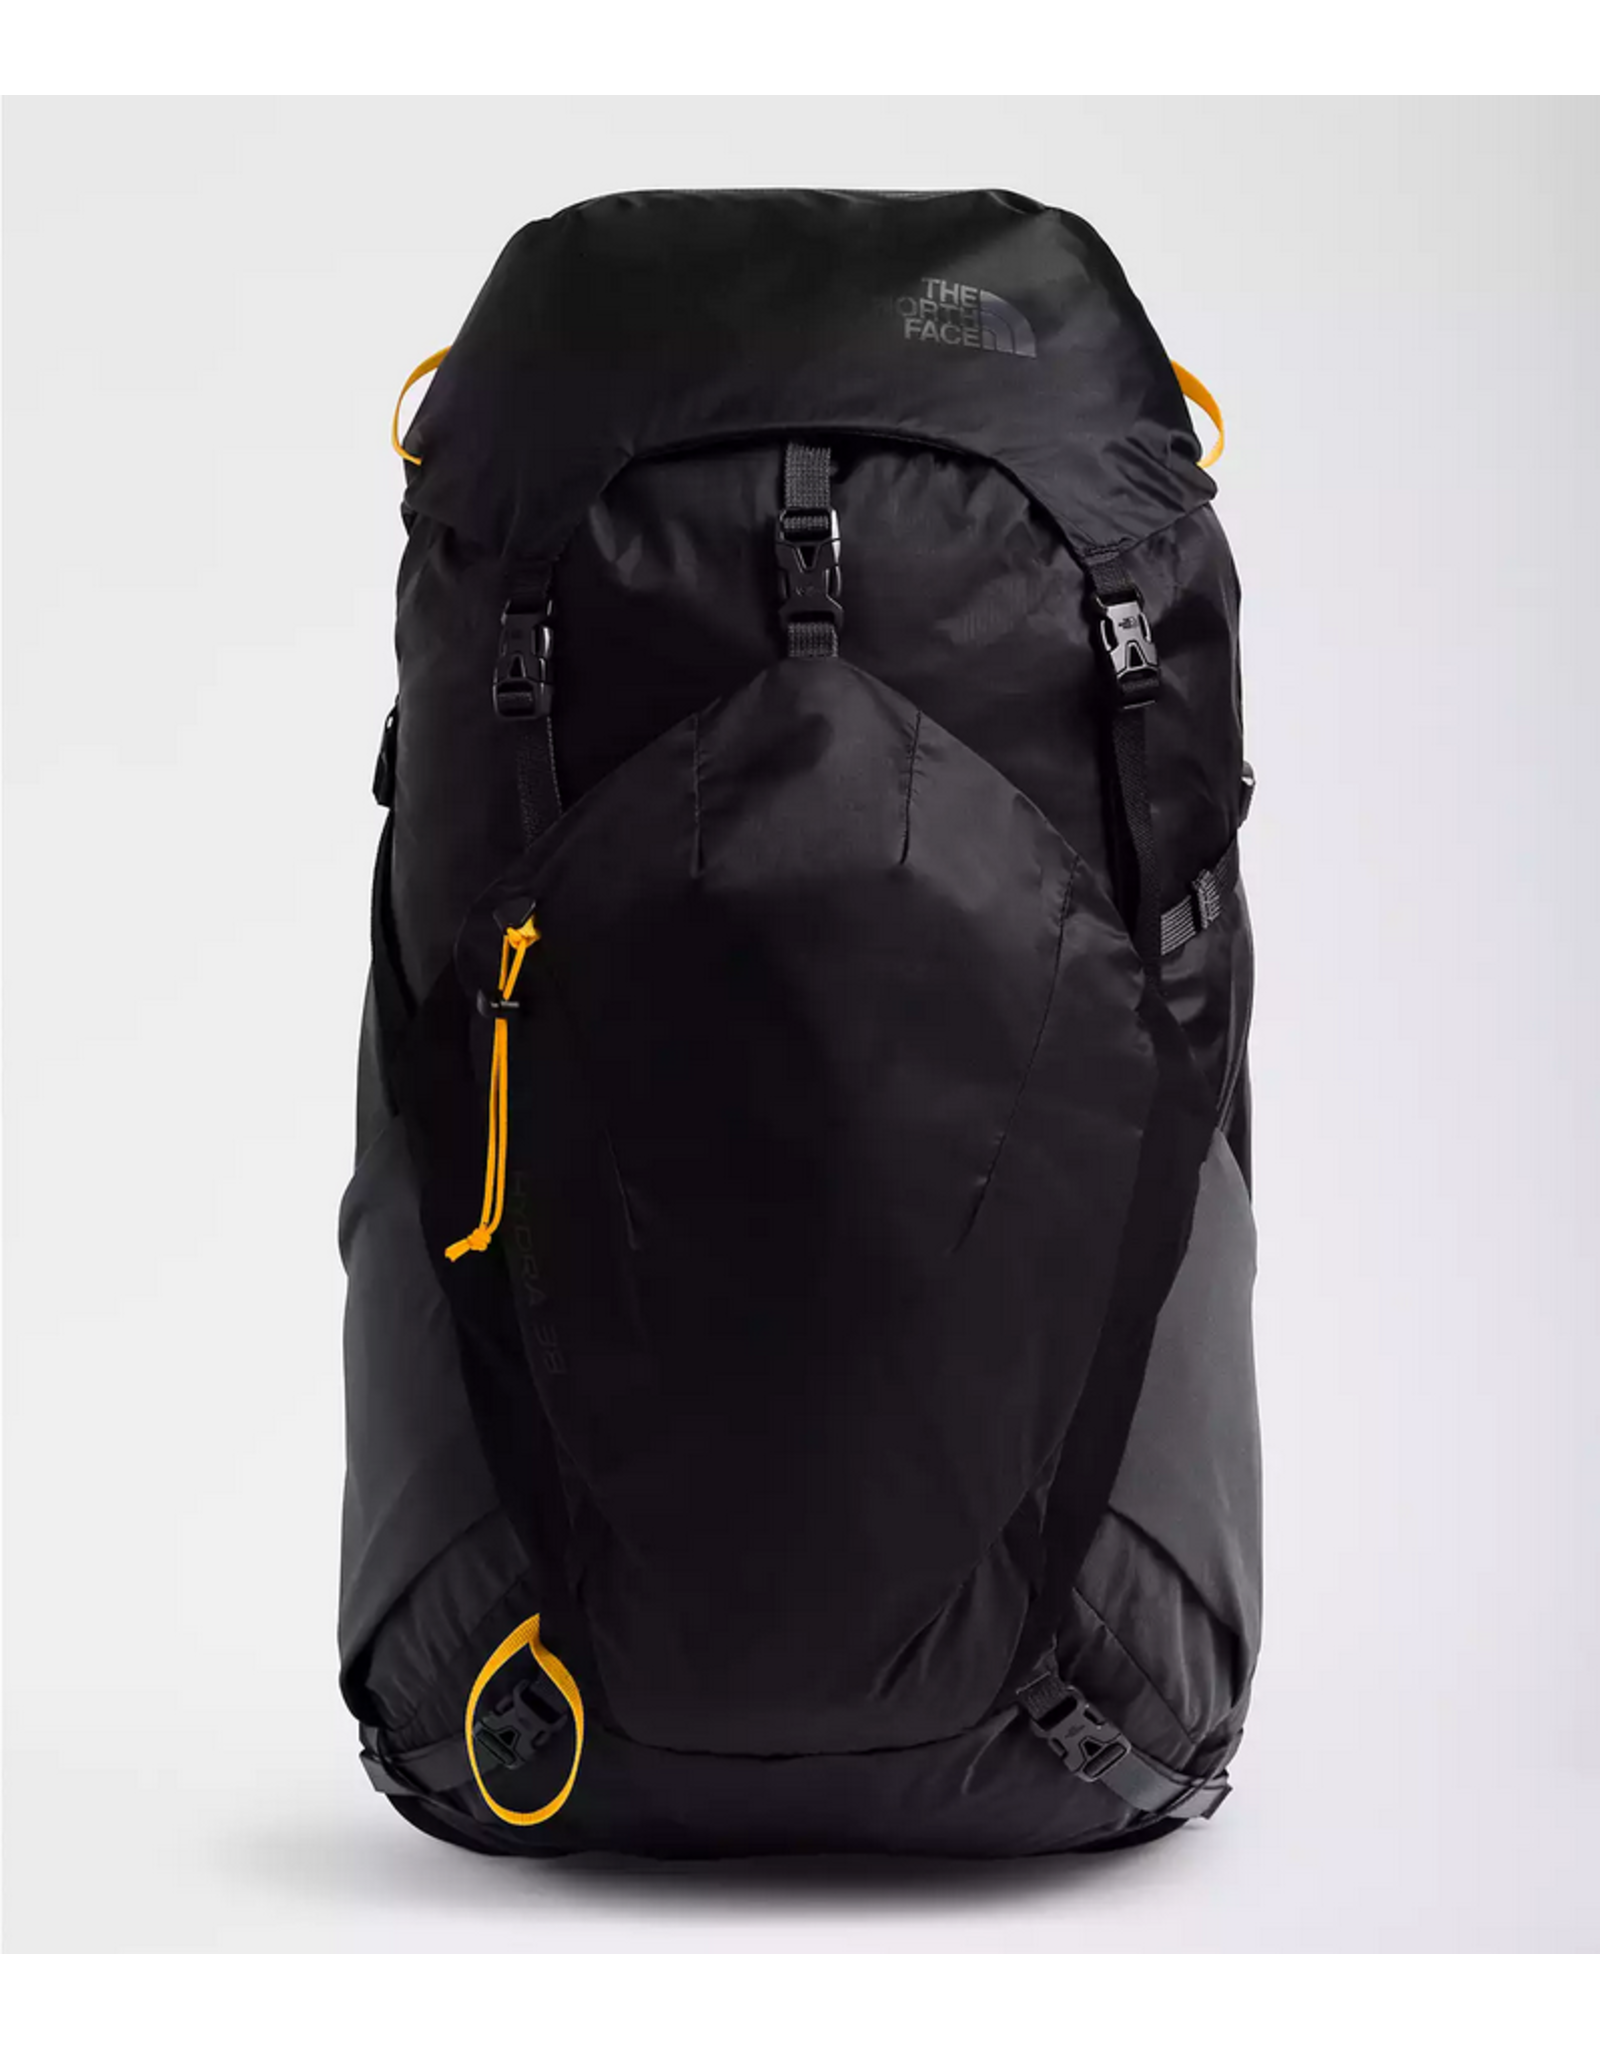 THE NORTH FACE HYDRA 38 PACK TNF